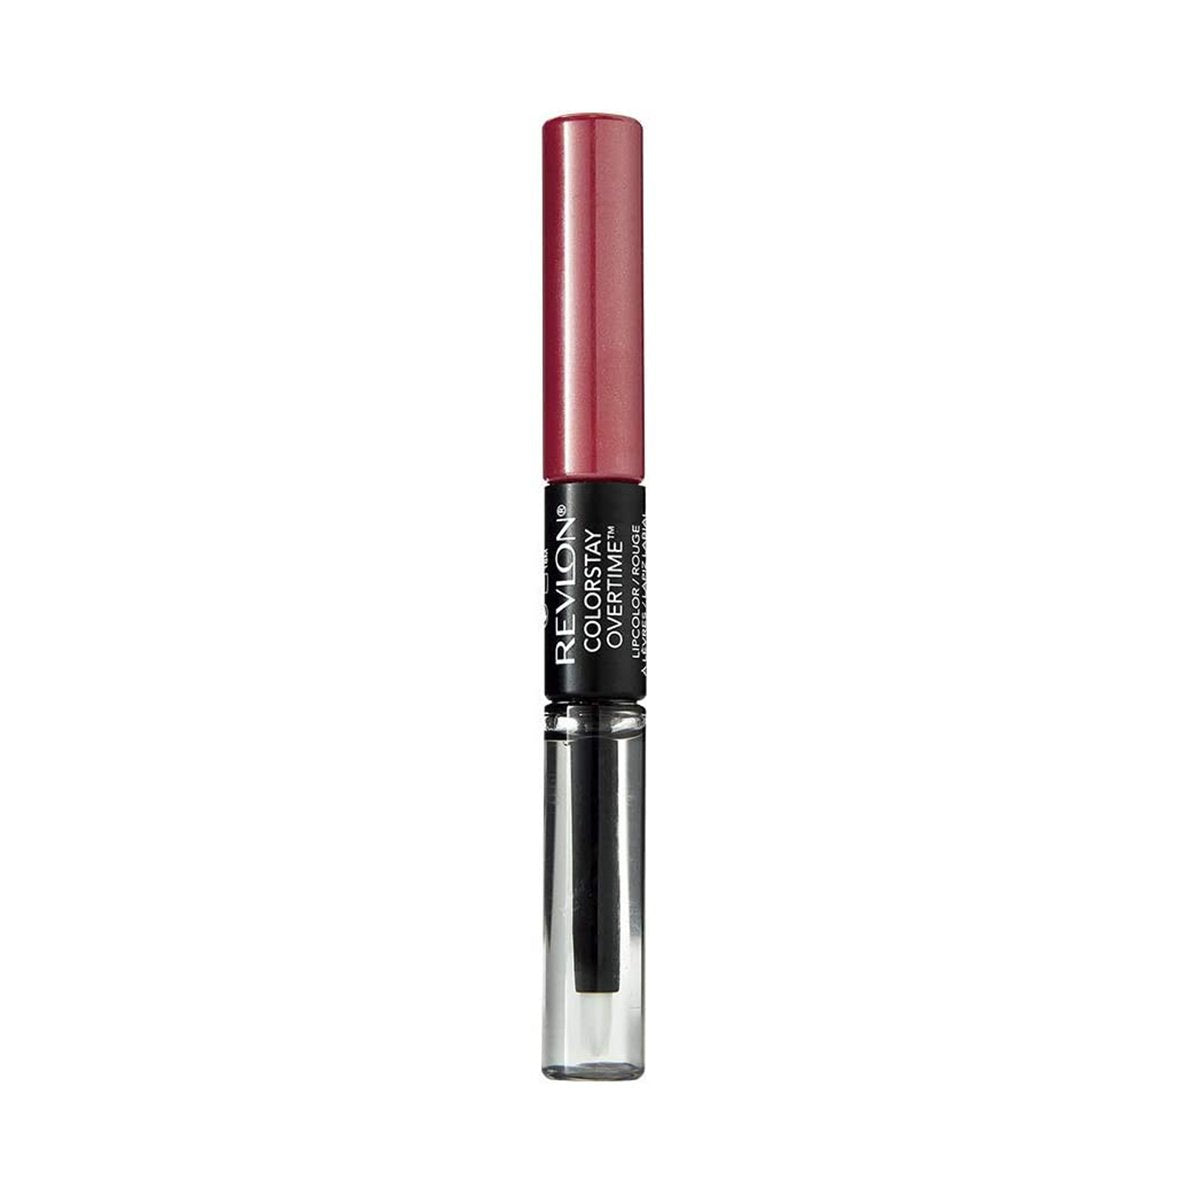 COLORSTAY OVERTIME LIPSTICK CONSTANTLY CORAL - REVLON